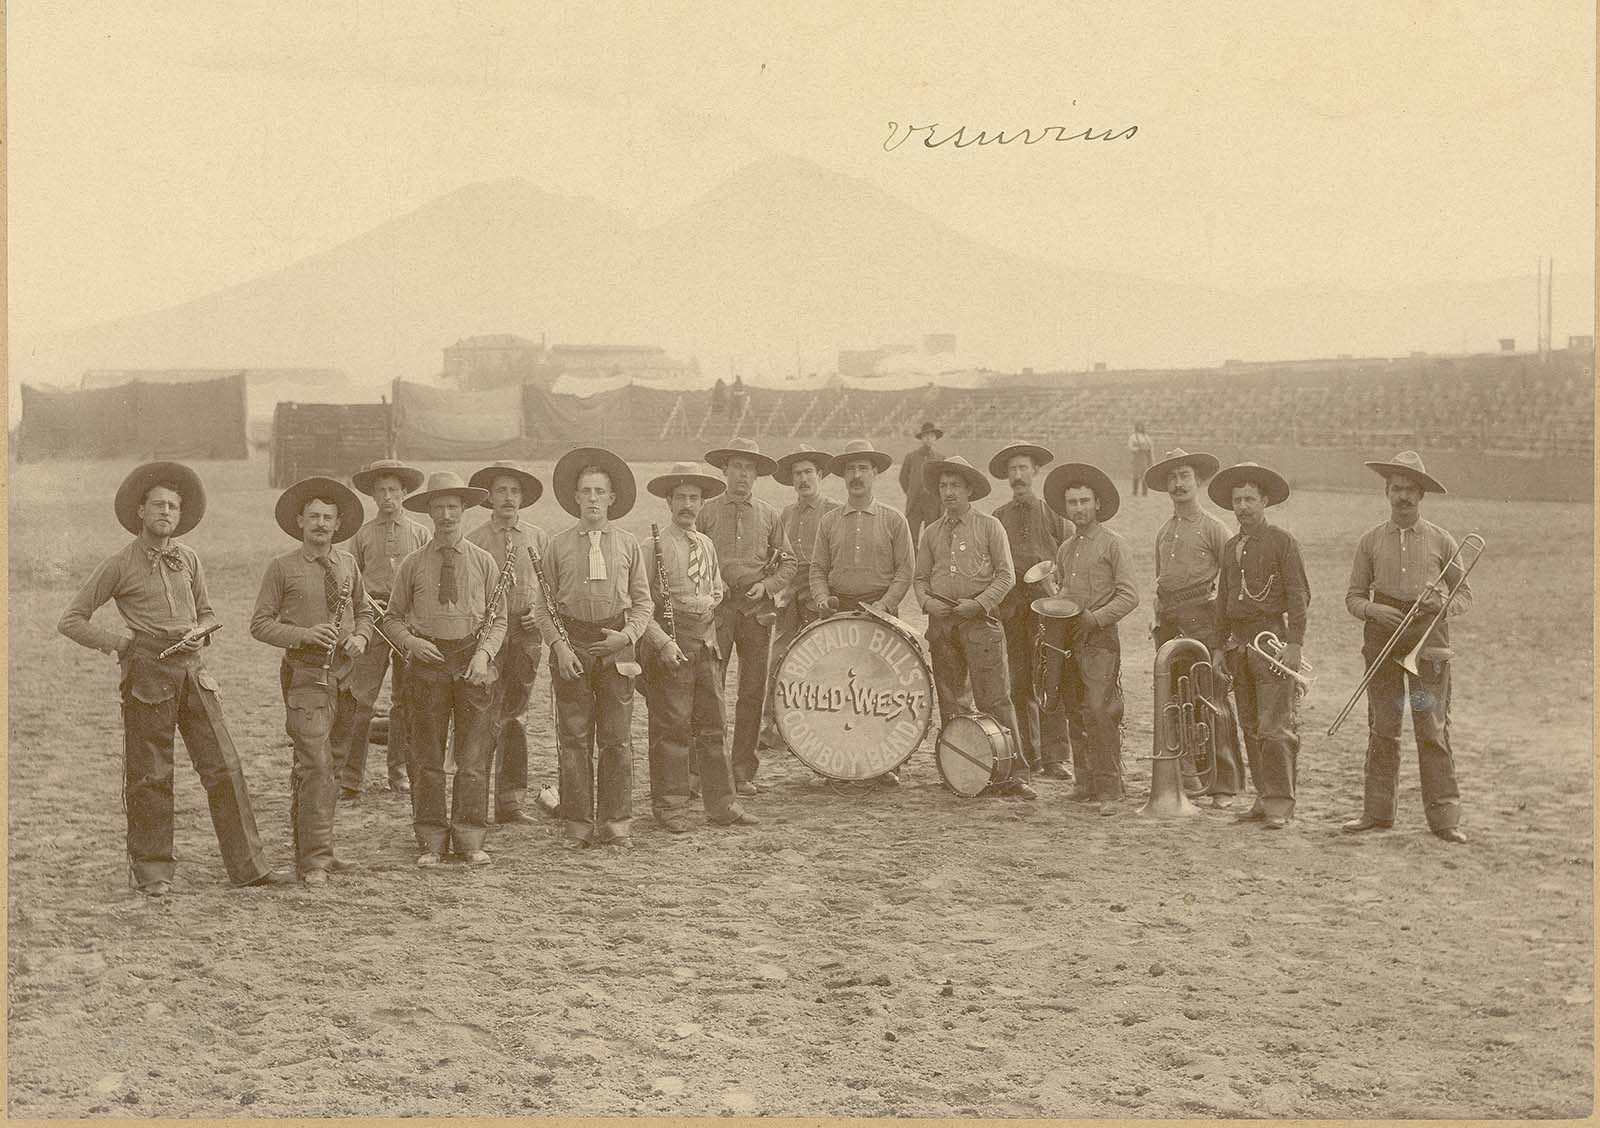 William Sweeney and the Cowboy Band with Mt. Vesuvius in background, 1890. MS 6 William F. Cody Collection, McCracken Research Library. P. 69.989